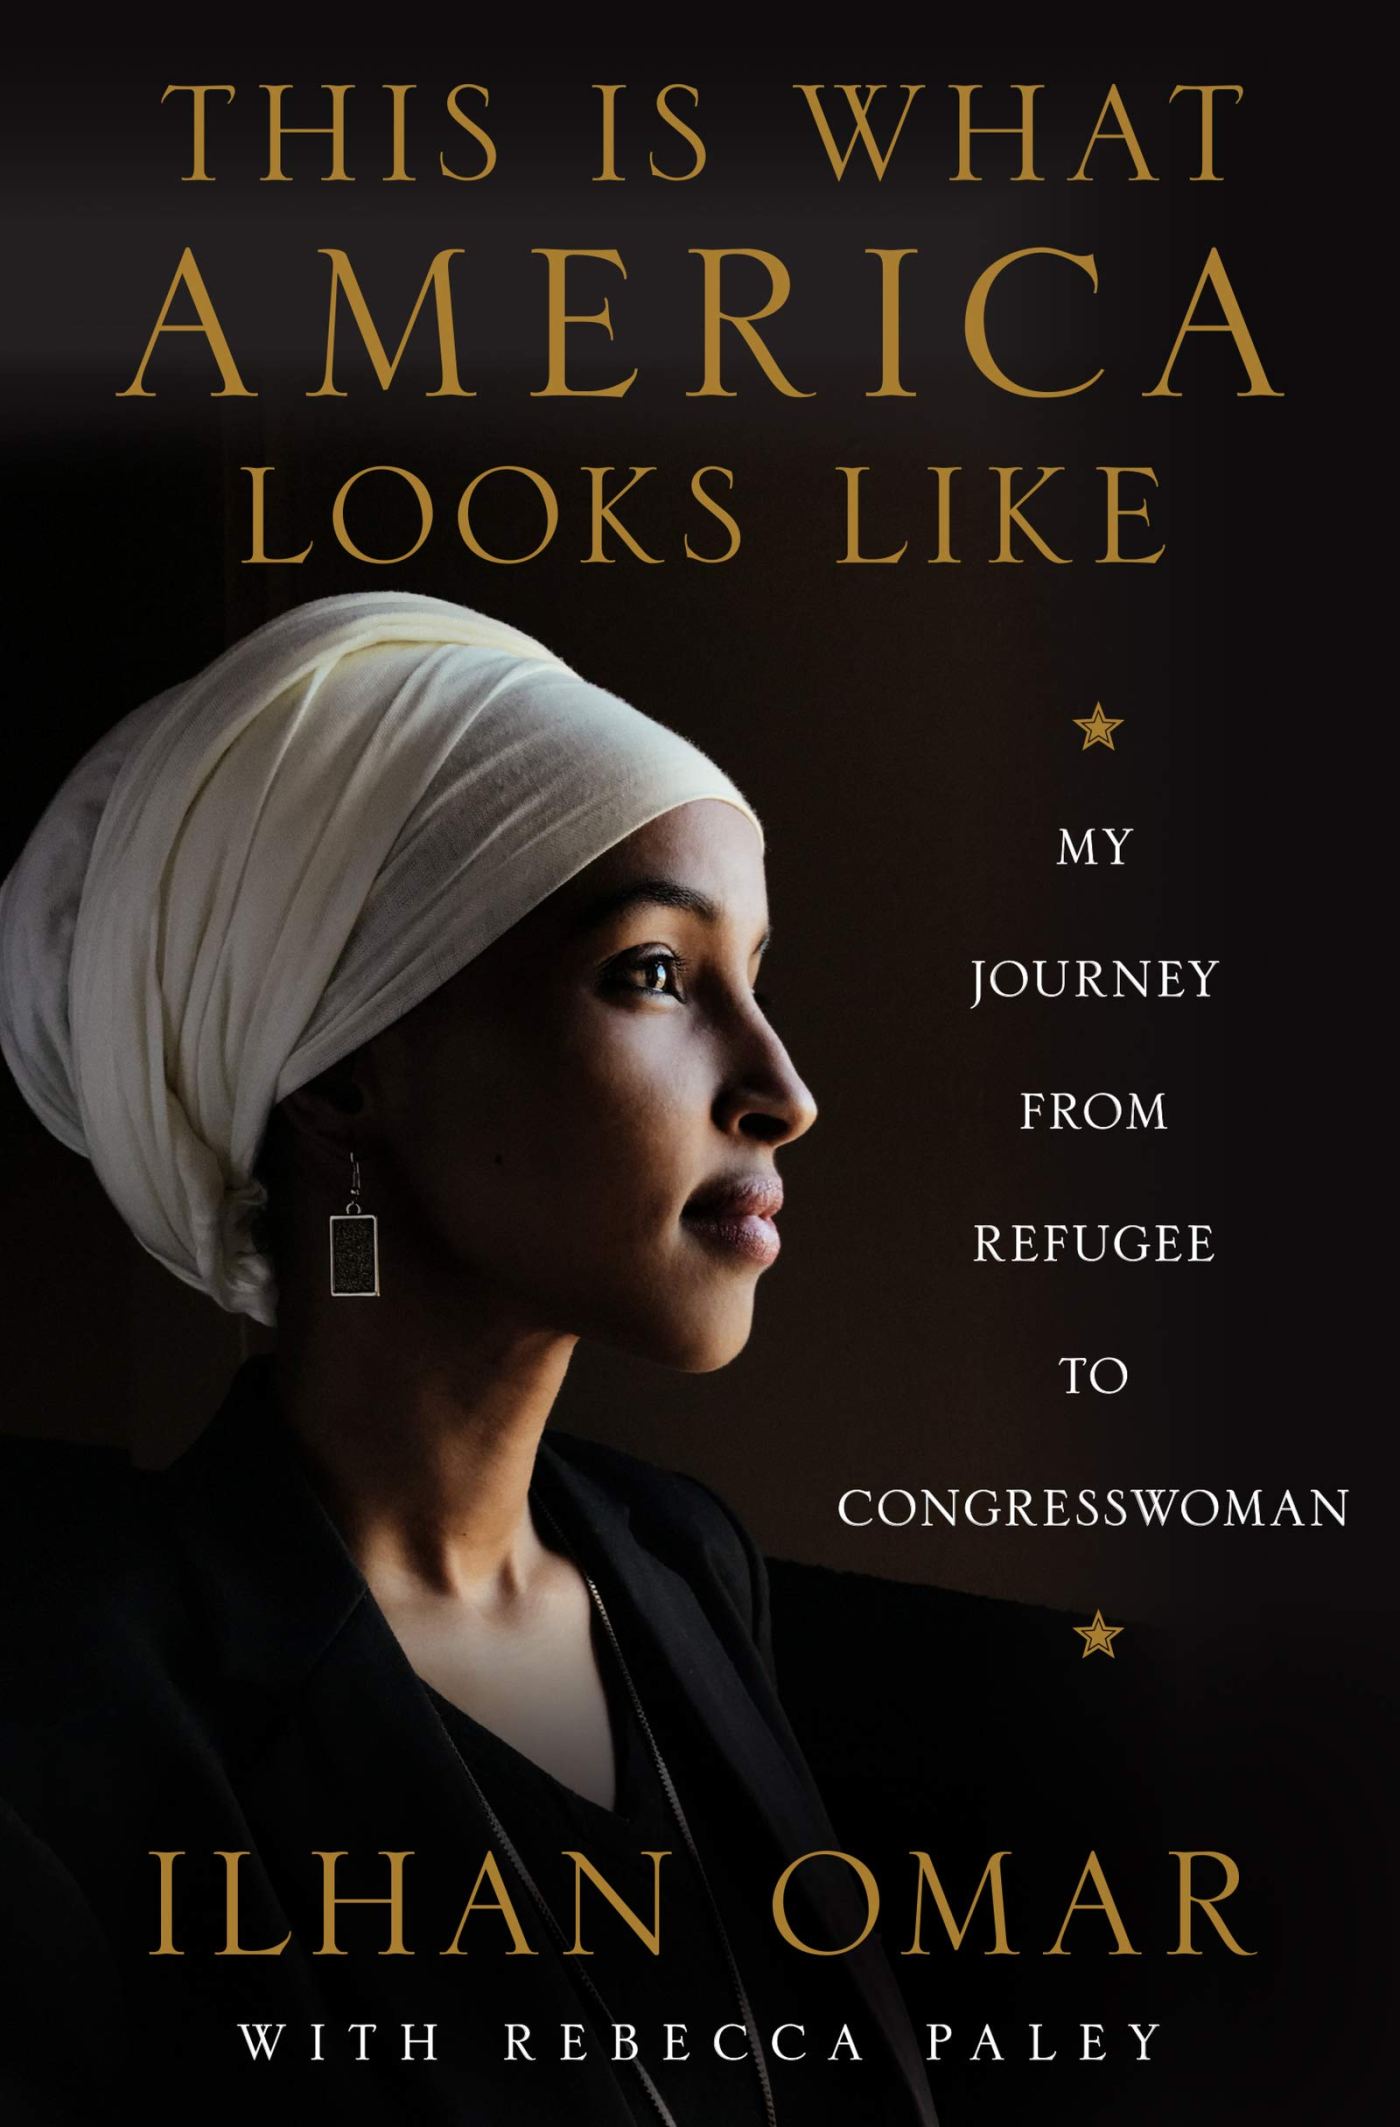 Ilhan Omar - This is What America Looks Like